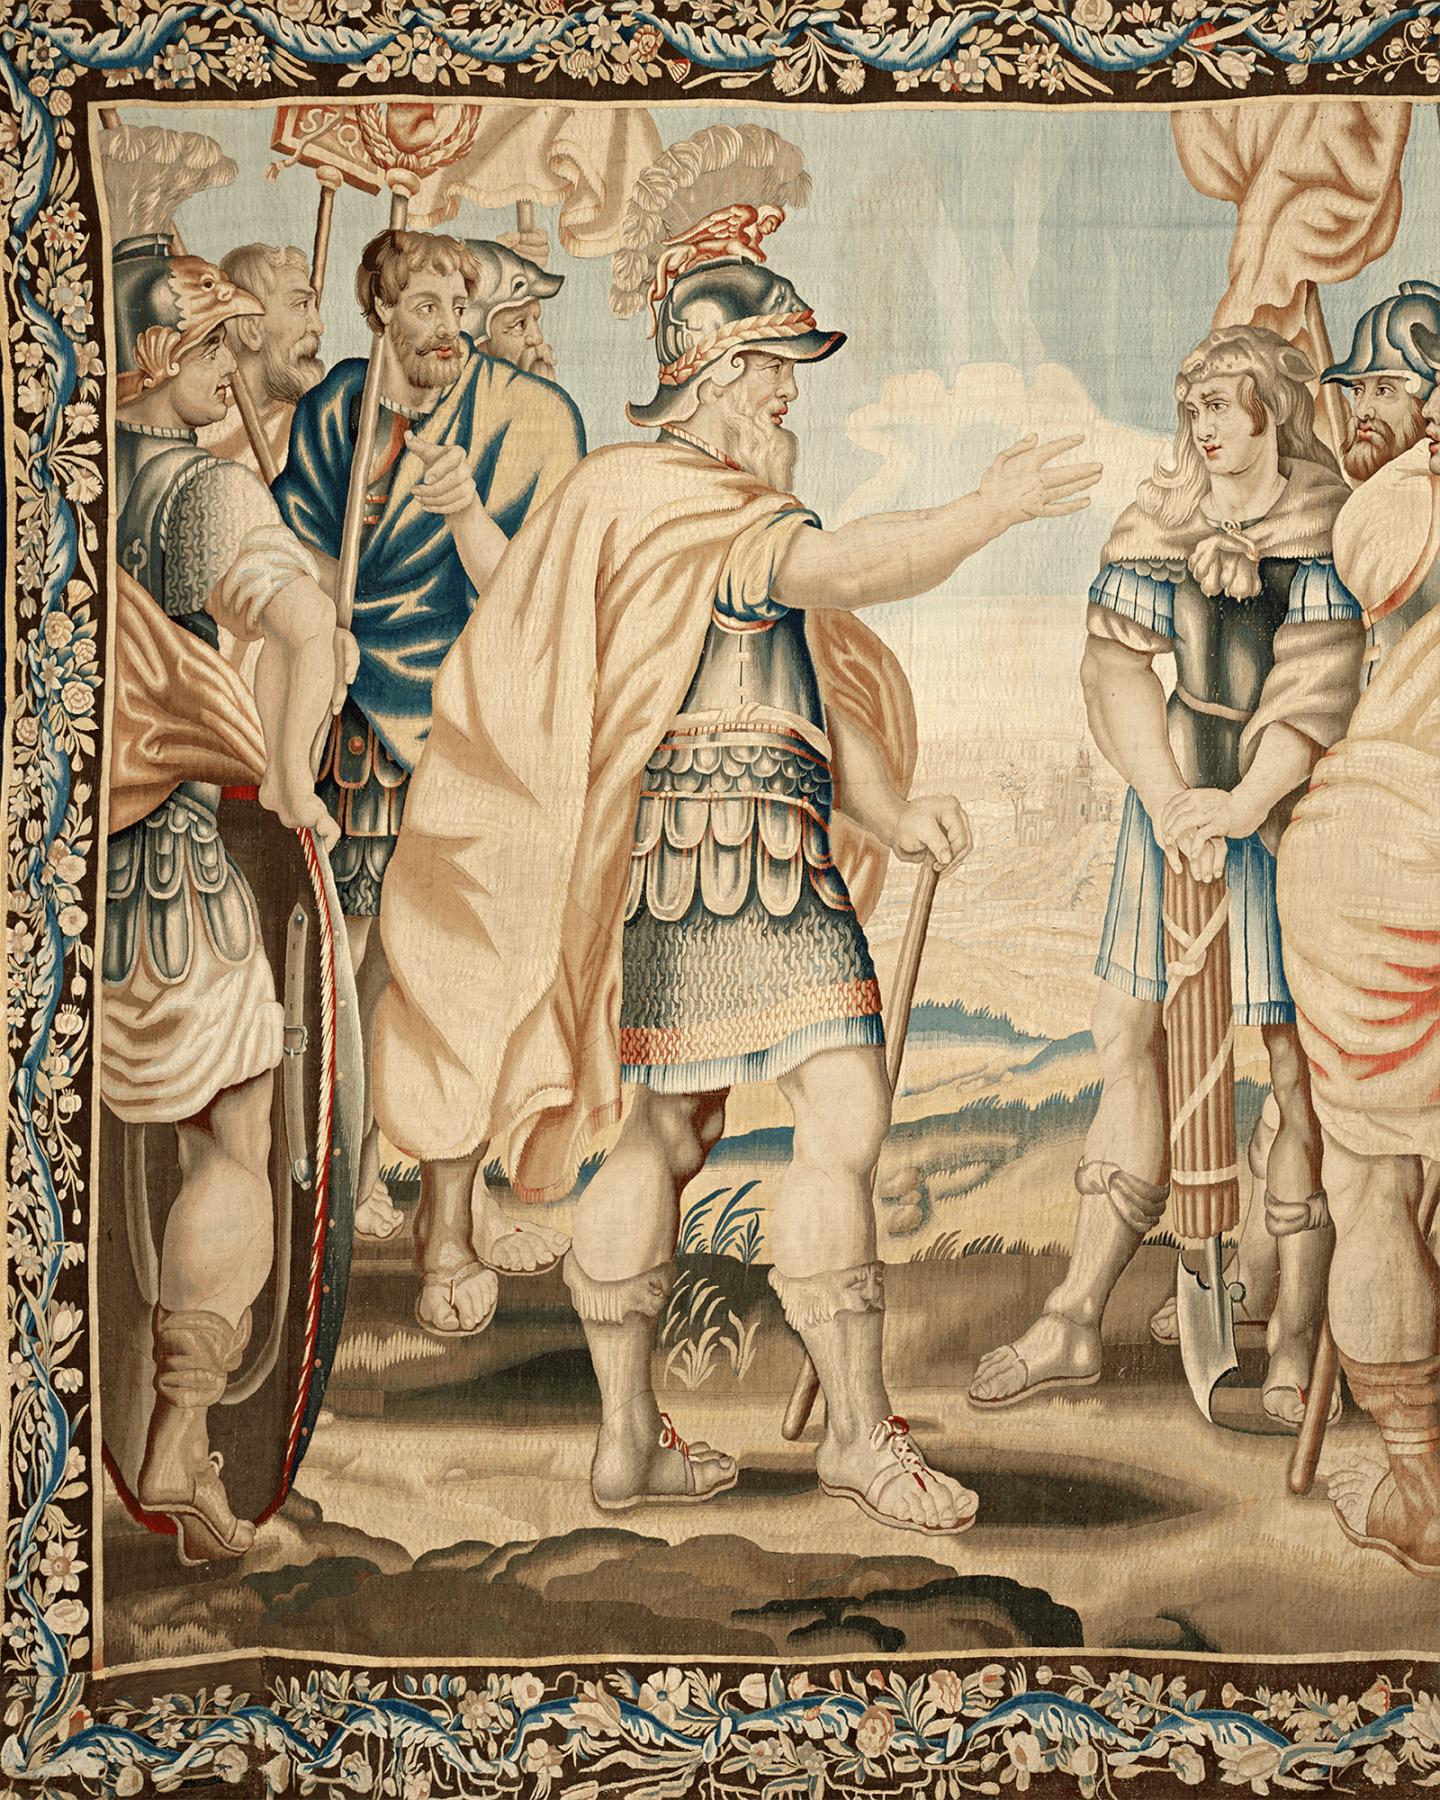 This extraordinary Belgian tapestry bears the hallmarks of superior workmanship that are synonymous with the tapestries of Antwerp. The scene it depicts is believed to be that of the legendary Roman general Coriolanus being made Captain of the